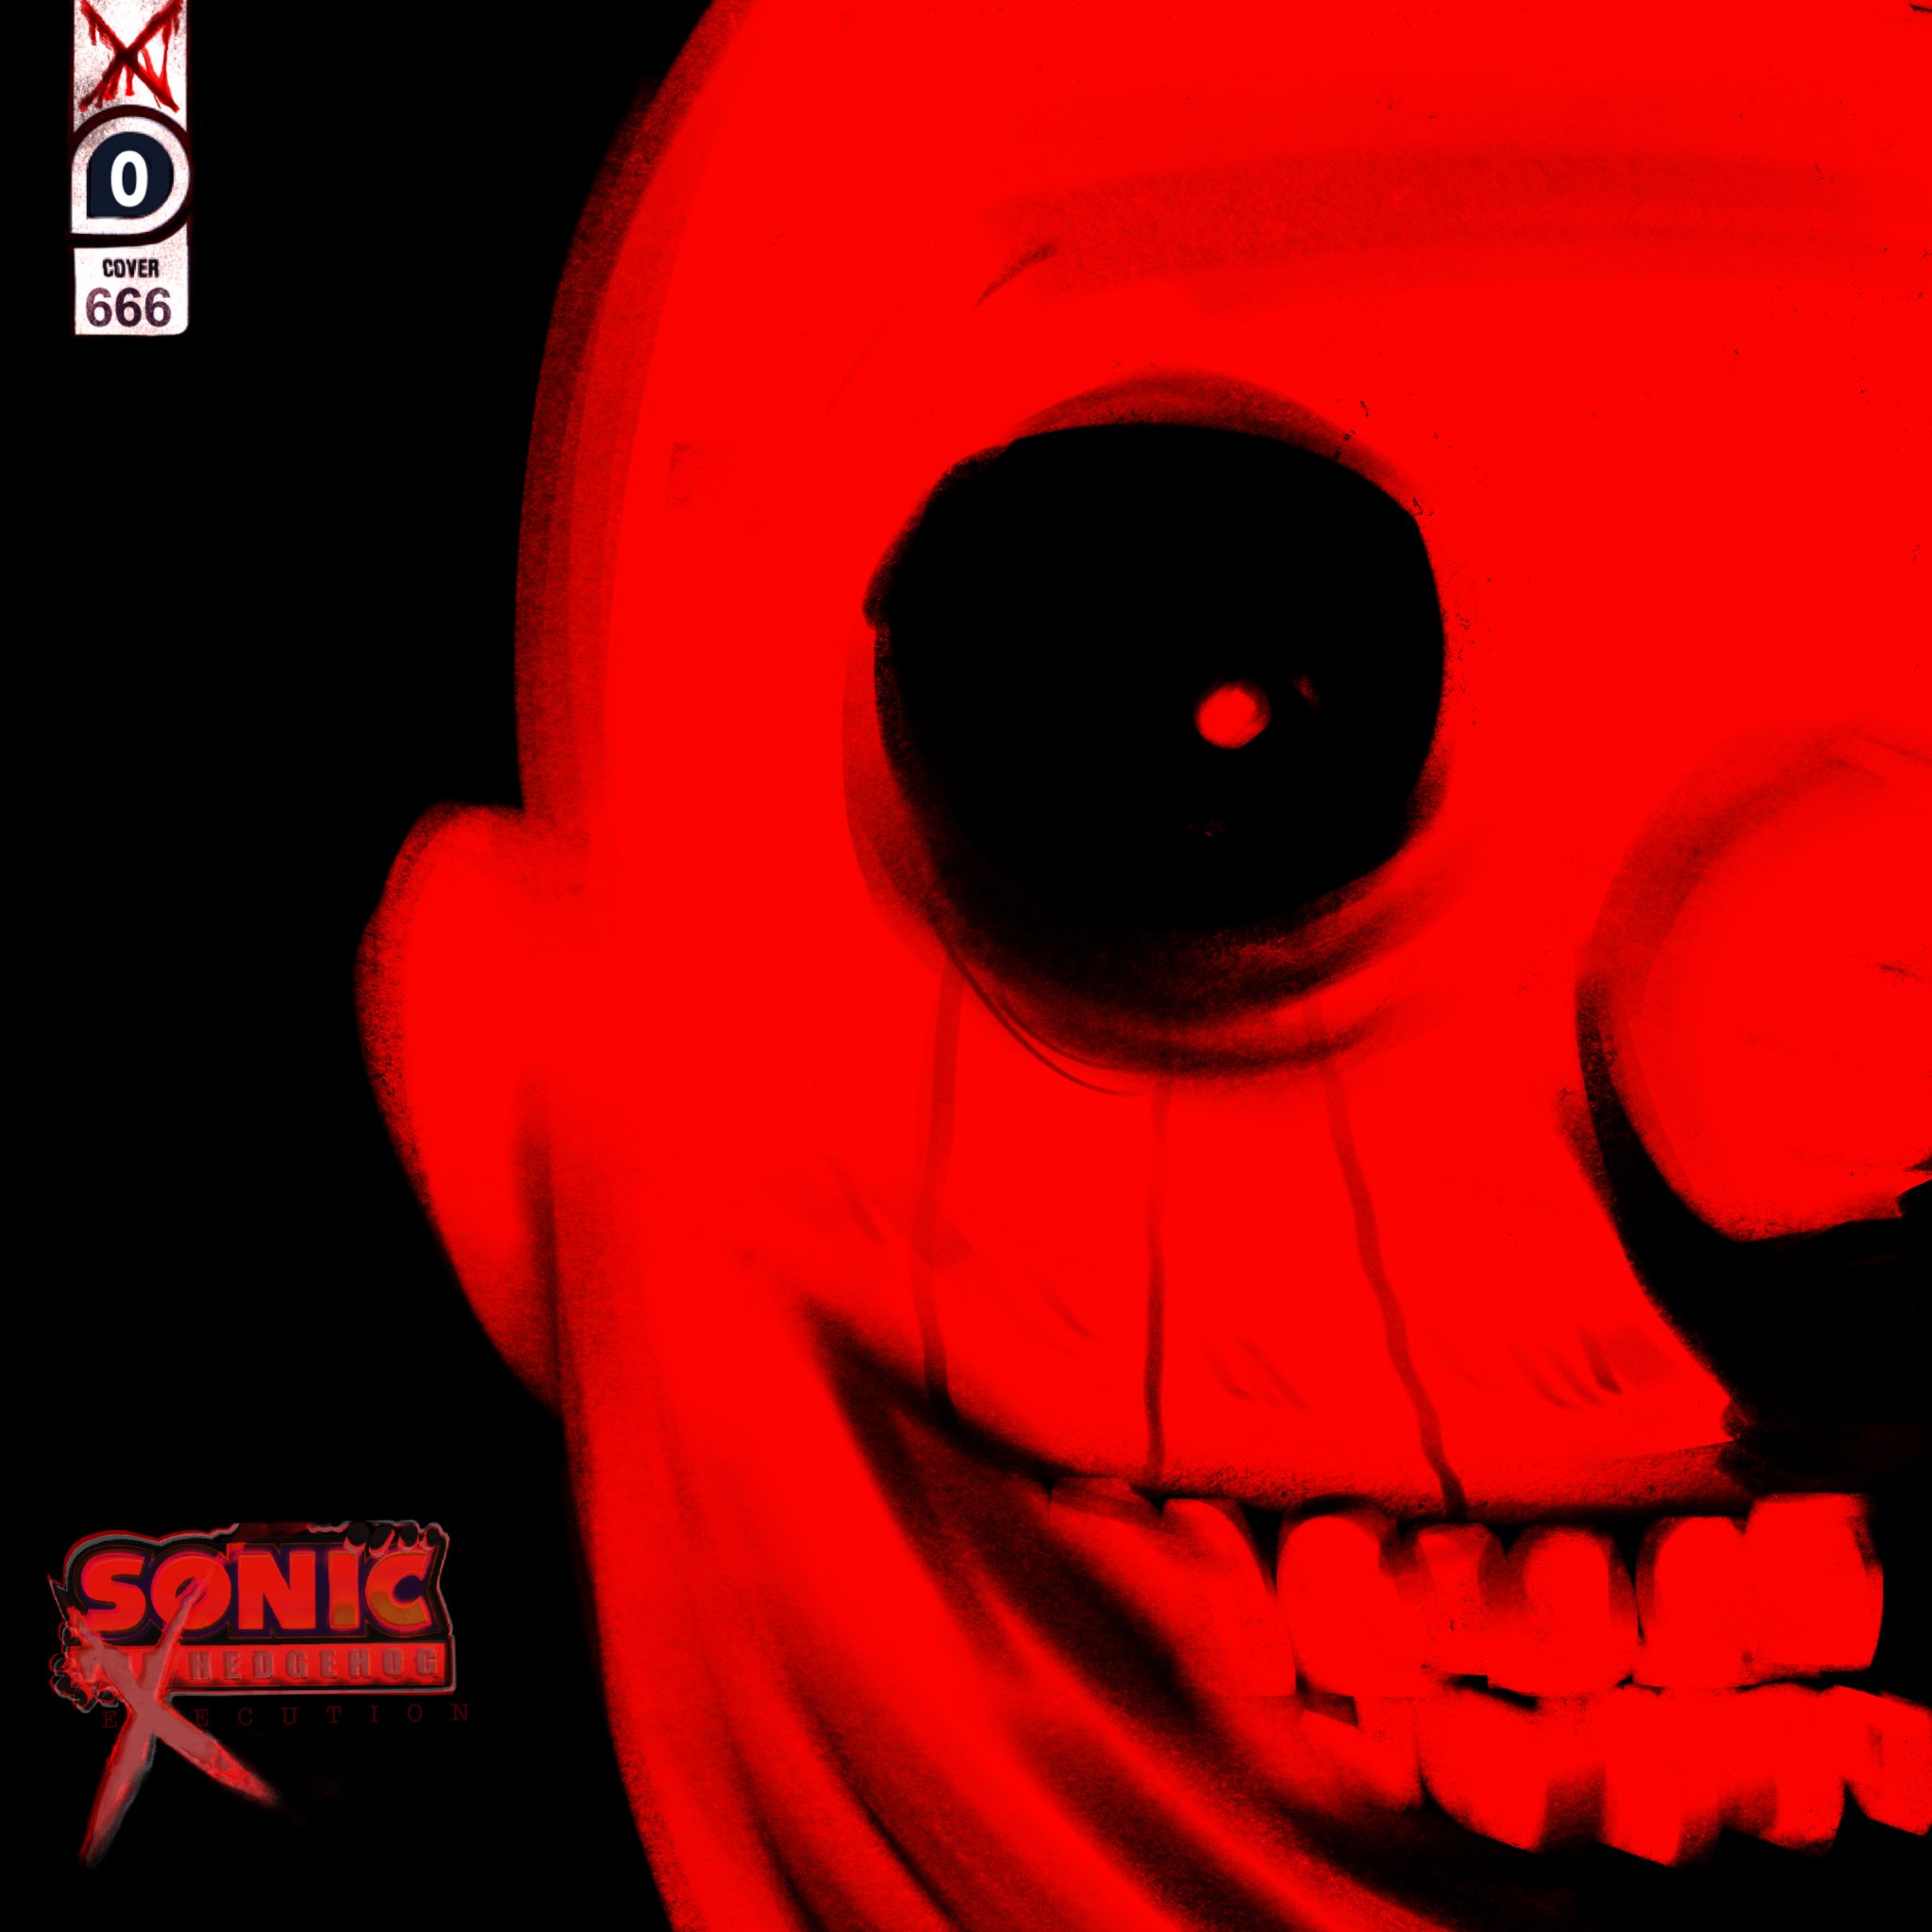 Sonic Execution (STARVED IS NOW RELEASED) on X: Sonic Execution